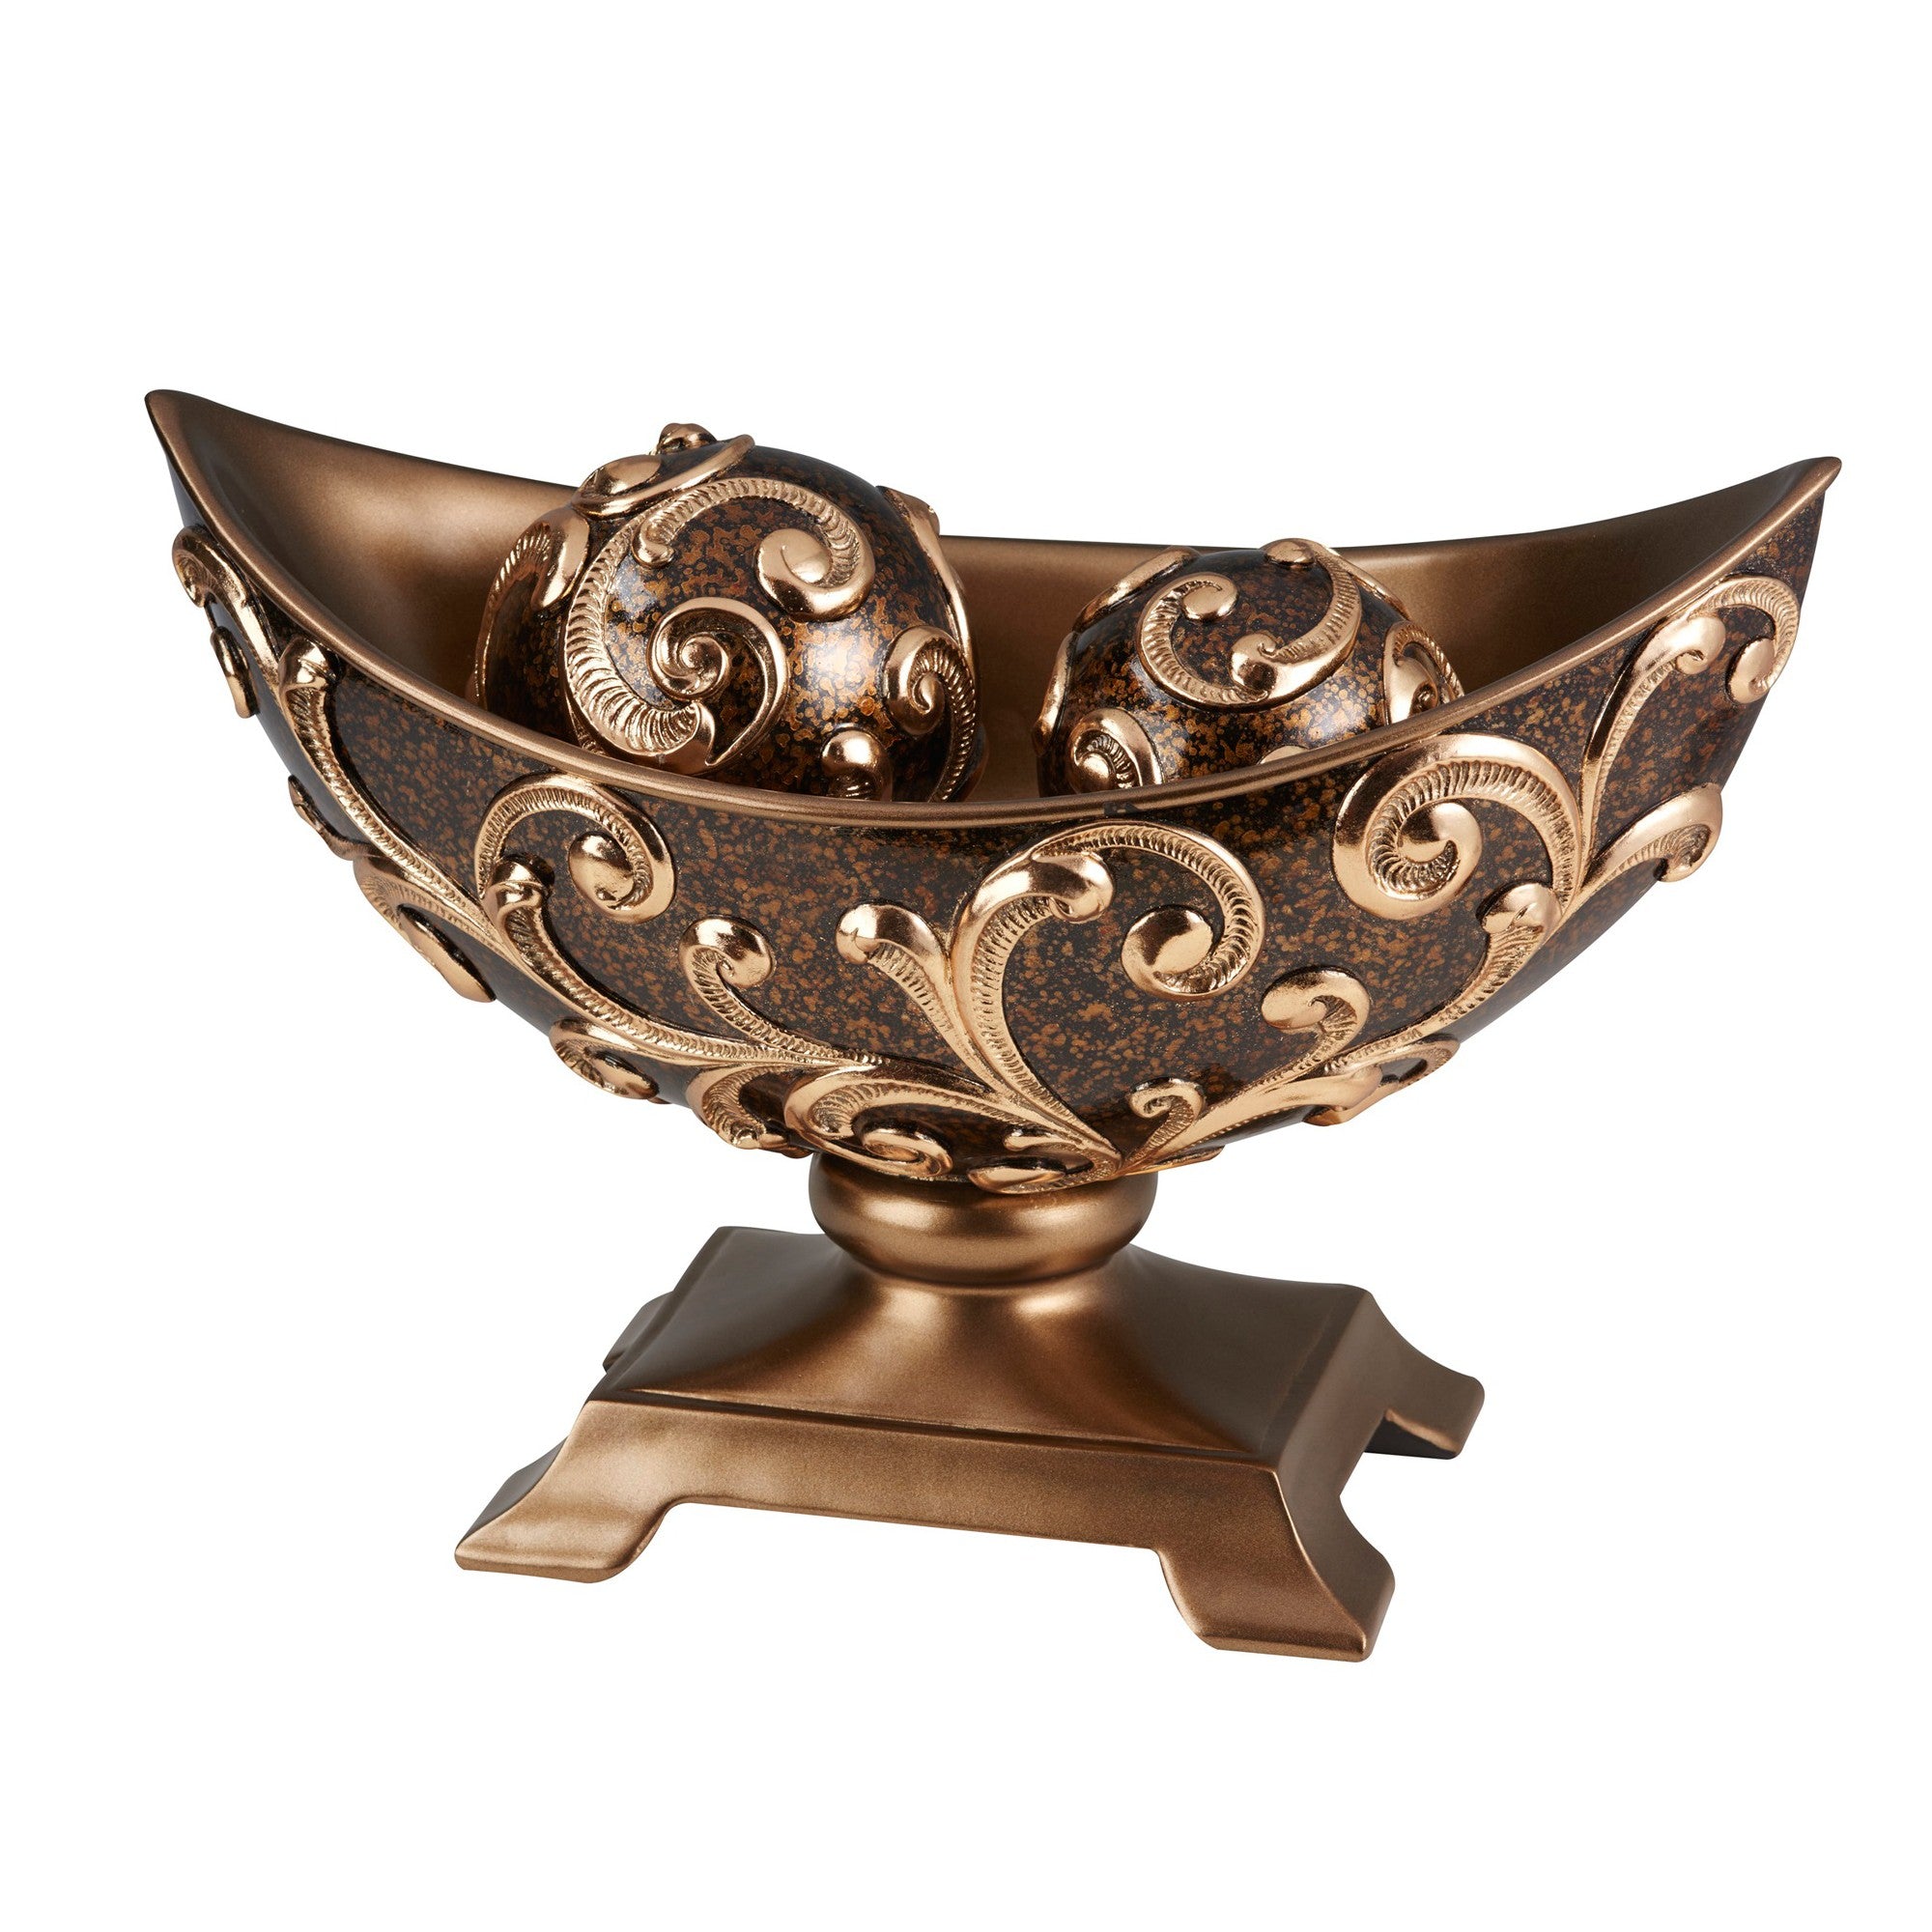 11" Brown And Gold Polyresin Decorative Bowl With Orbs